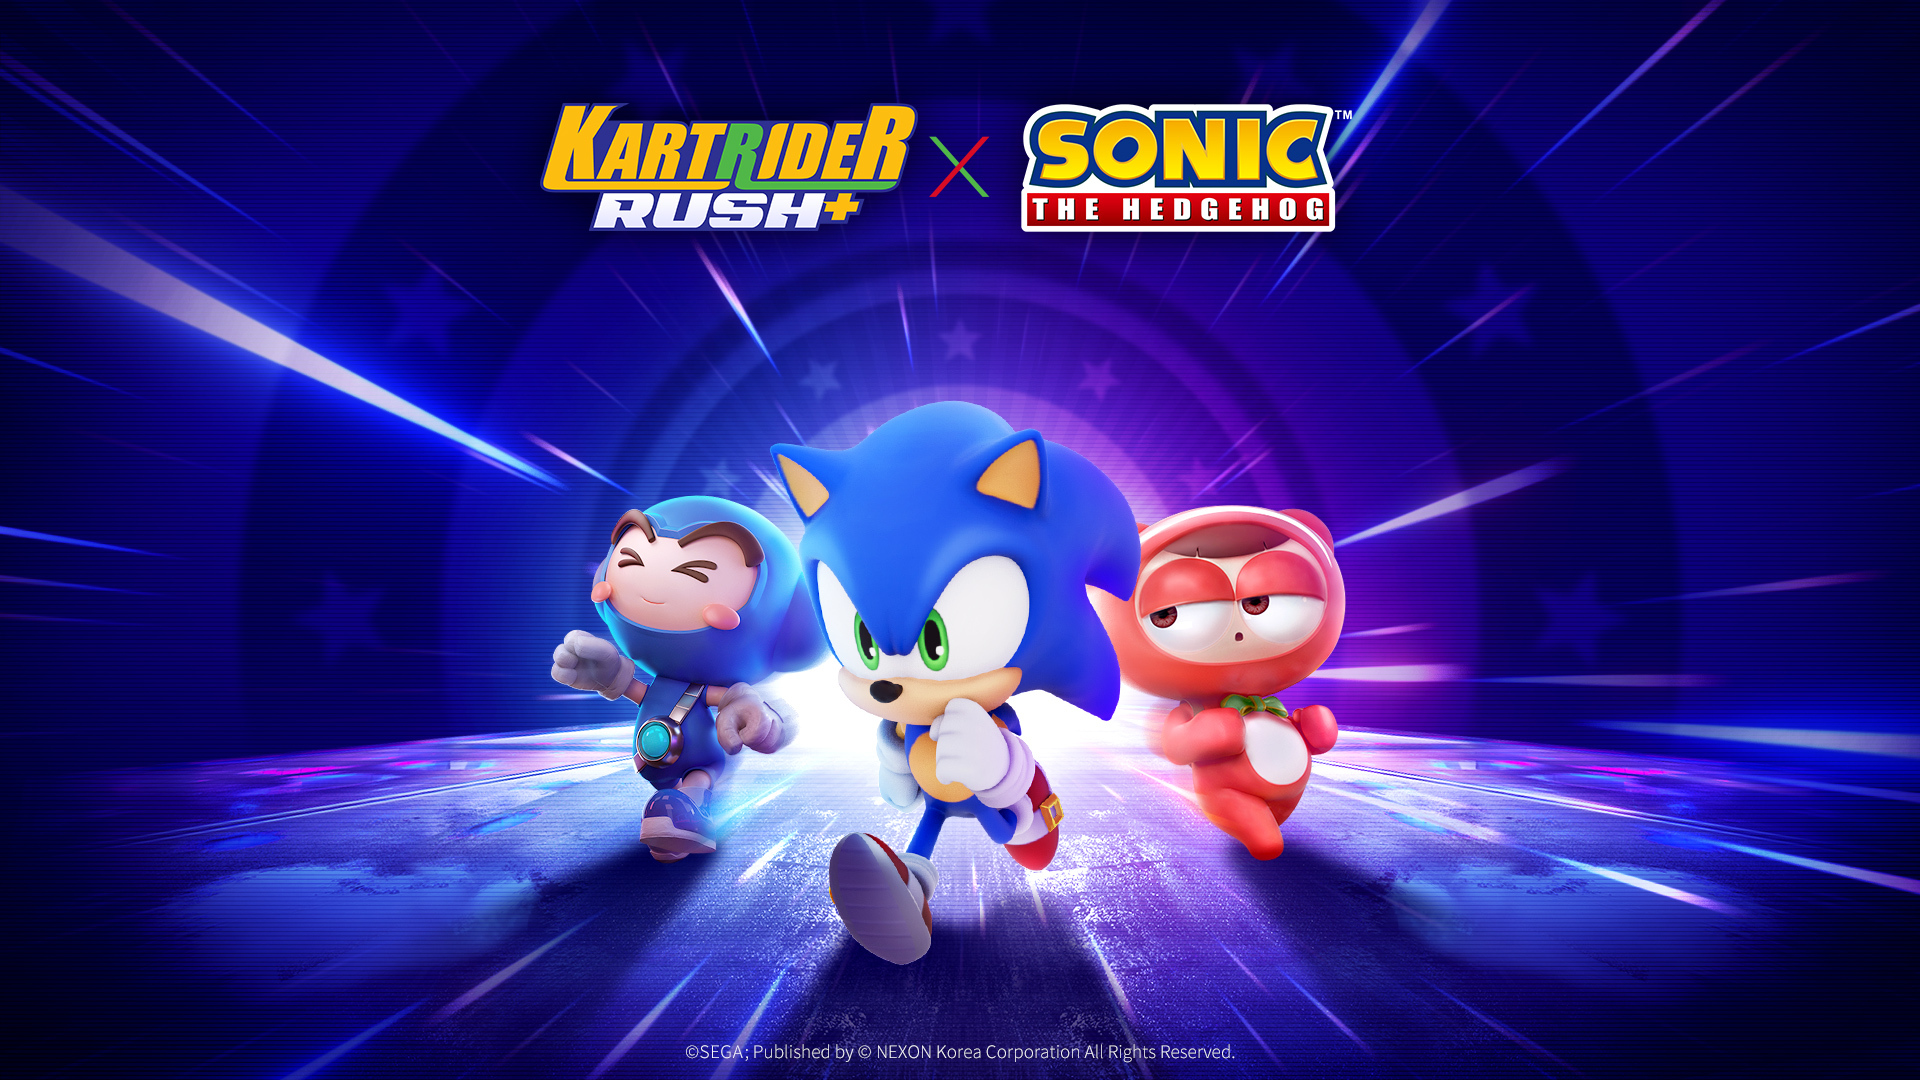 Sonic the Hedgehog Characters Join KartRider Rush+ From Now Until June 30 -  mxdwn Games